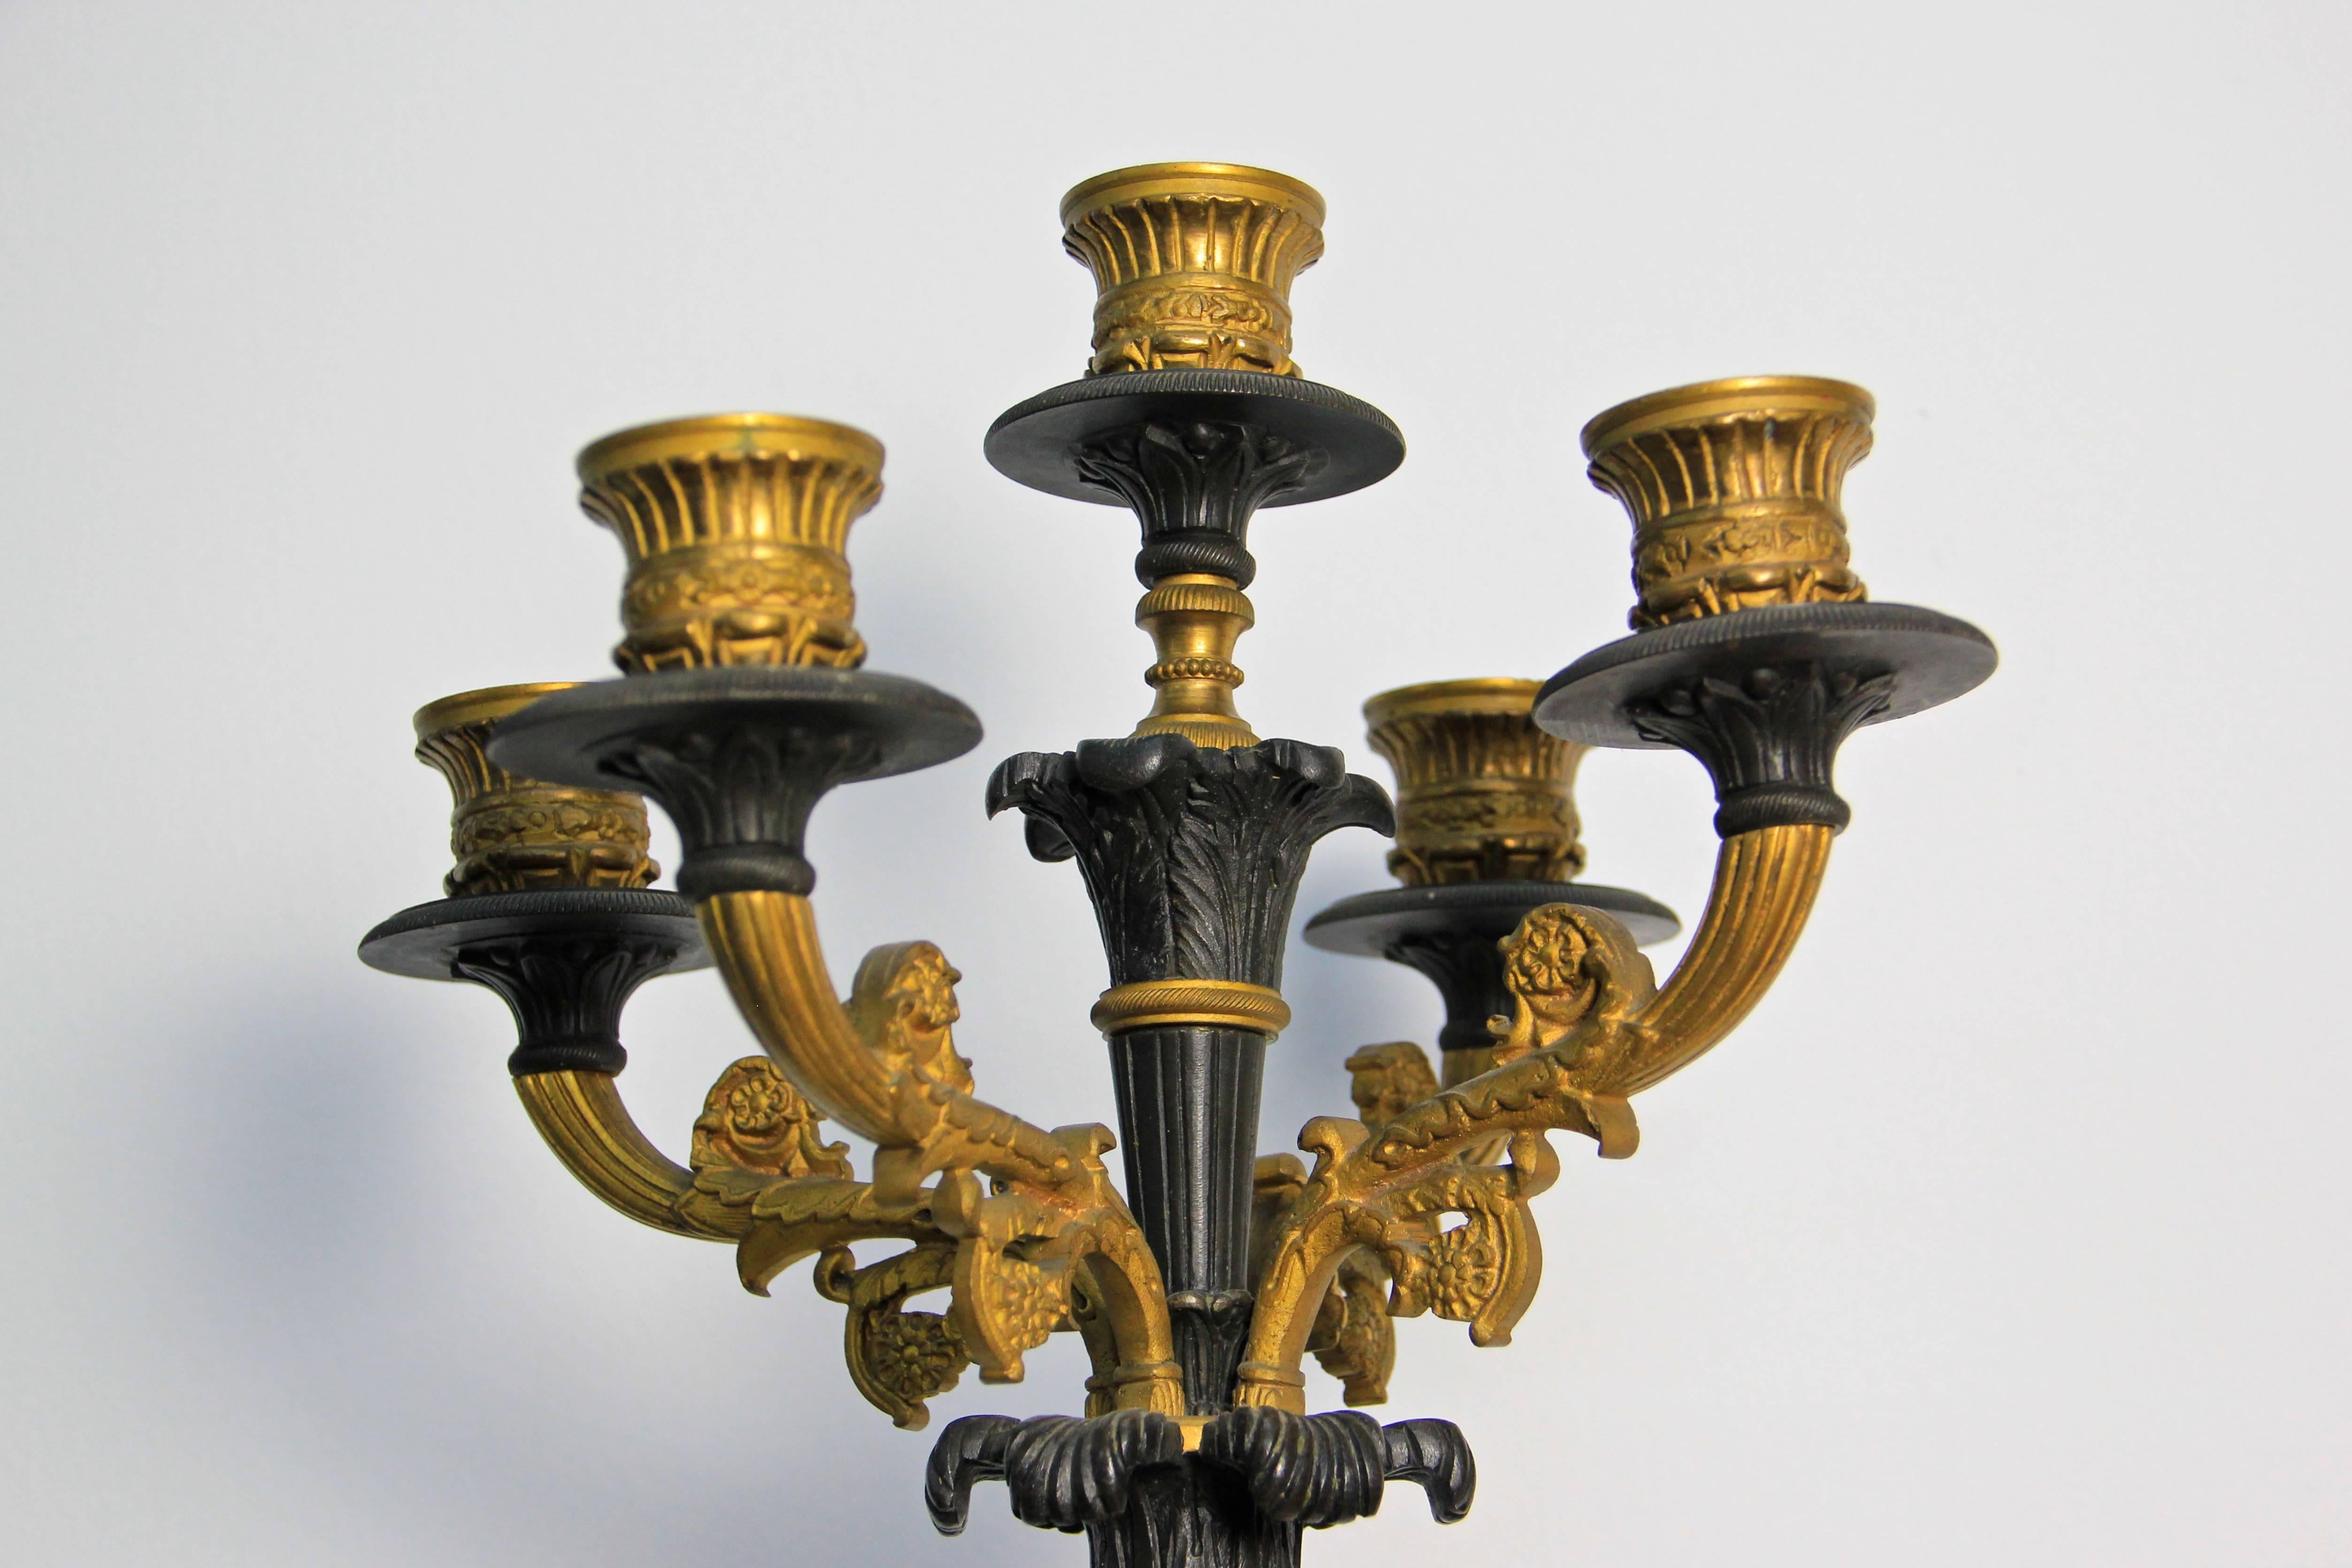 Gilt French Candelabra with Black and Yellow Marble Empire Style, France, circa 1850